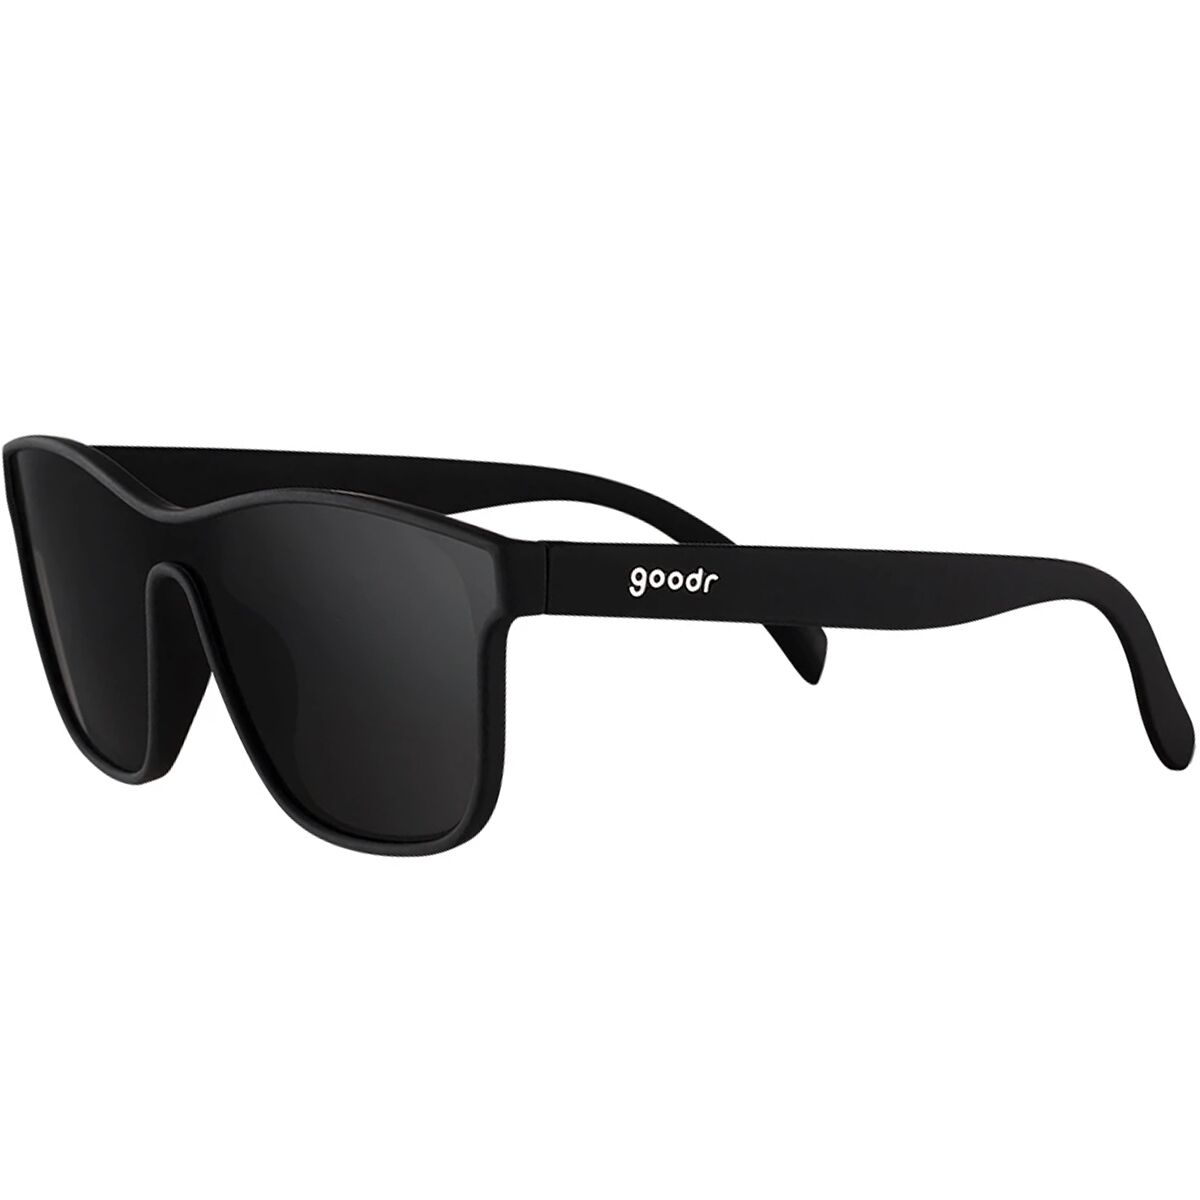 Goodr The Future Is Void Polarized Sunglasses